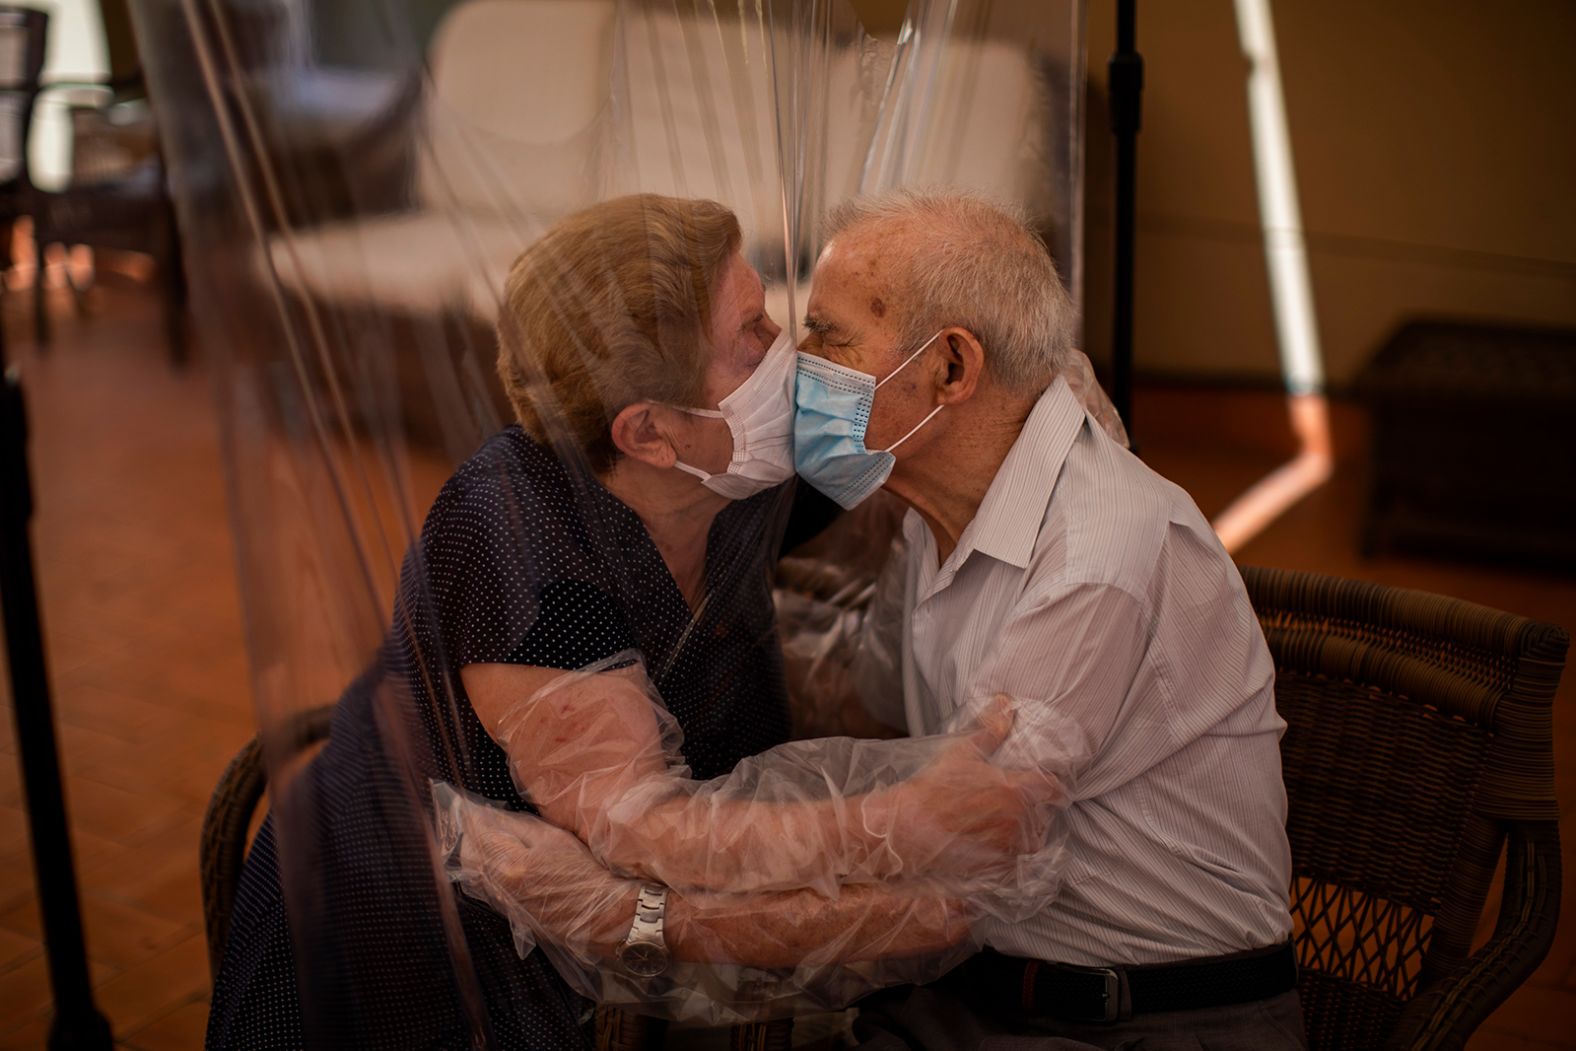 Agustina Cañamero and Pascual Pérez kiss each other through a plastic screen at a nursing home in Barcelona, Spain, on June 22. They've been married for 59 years.